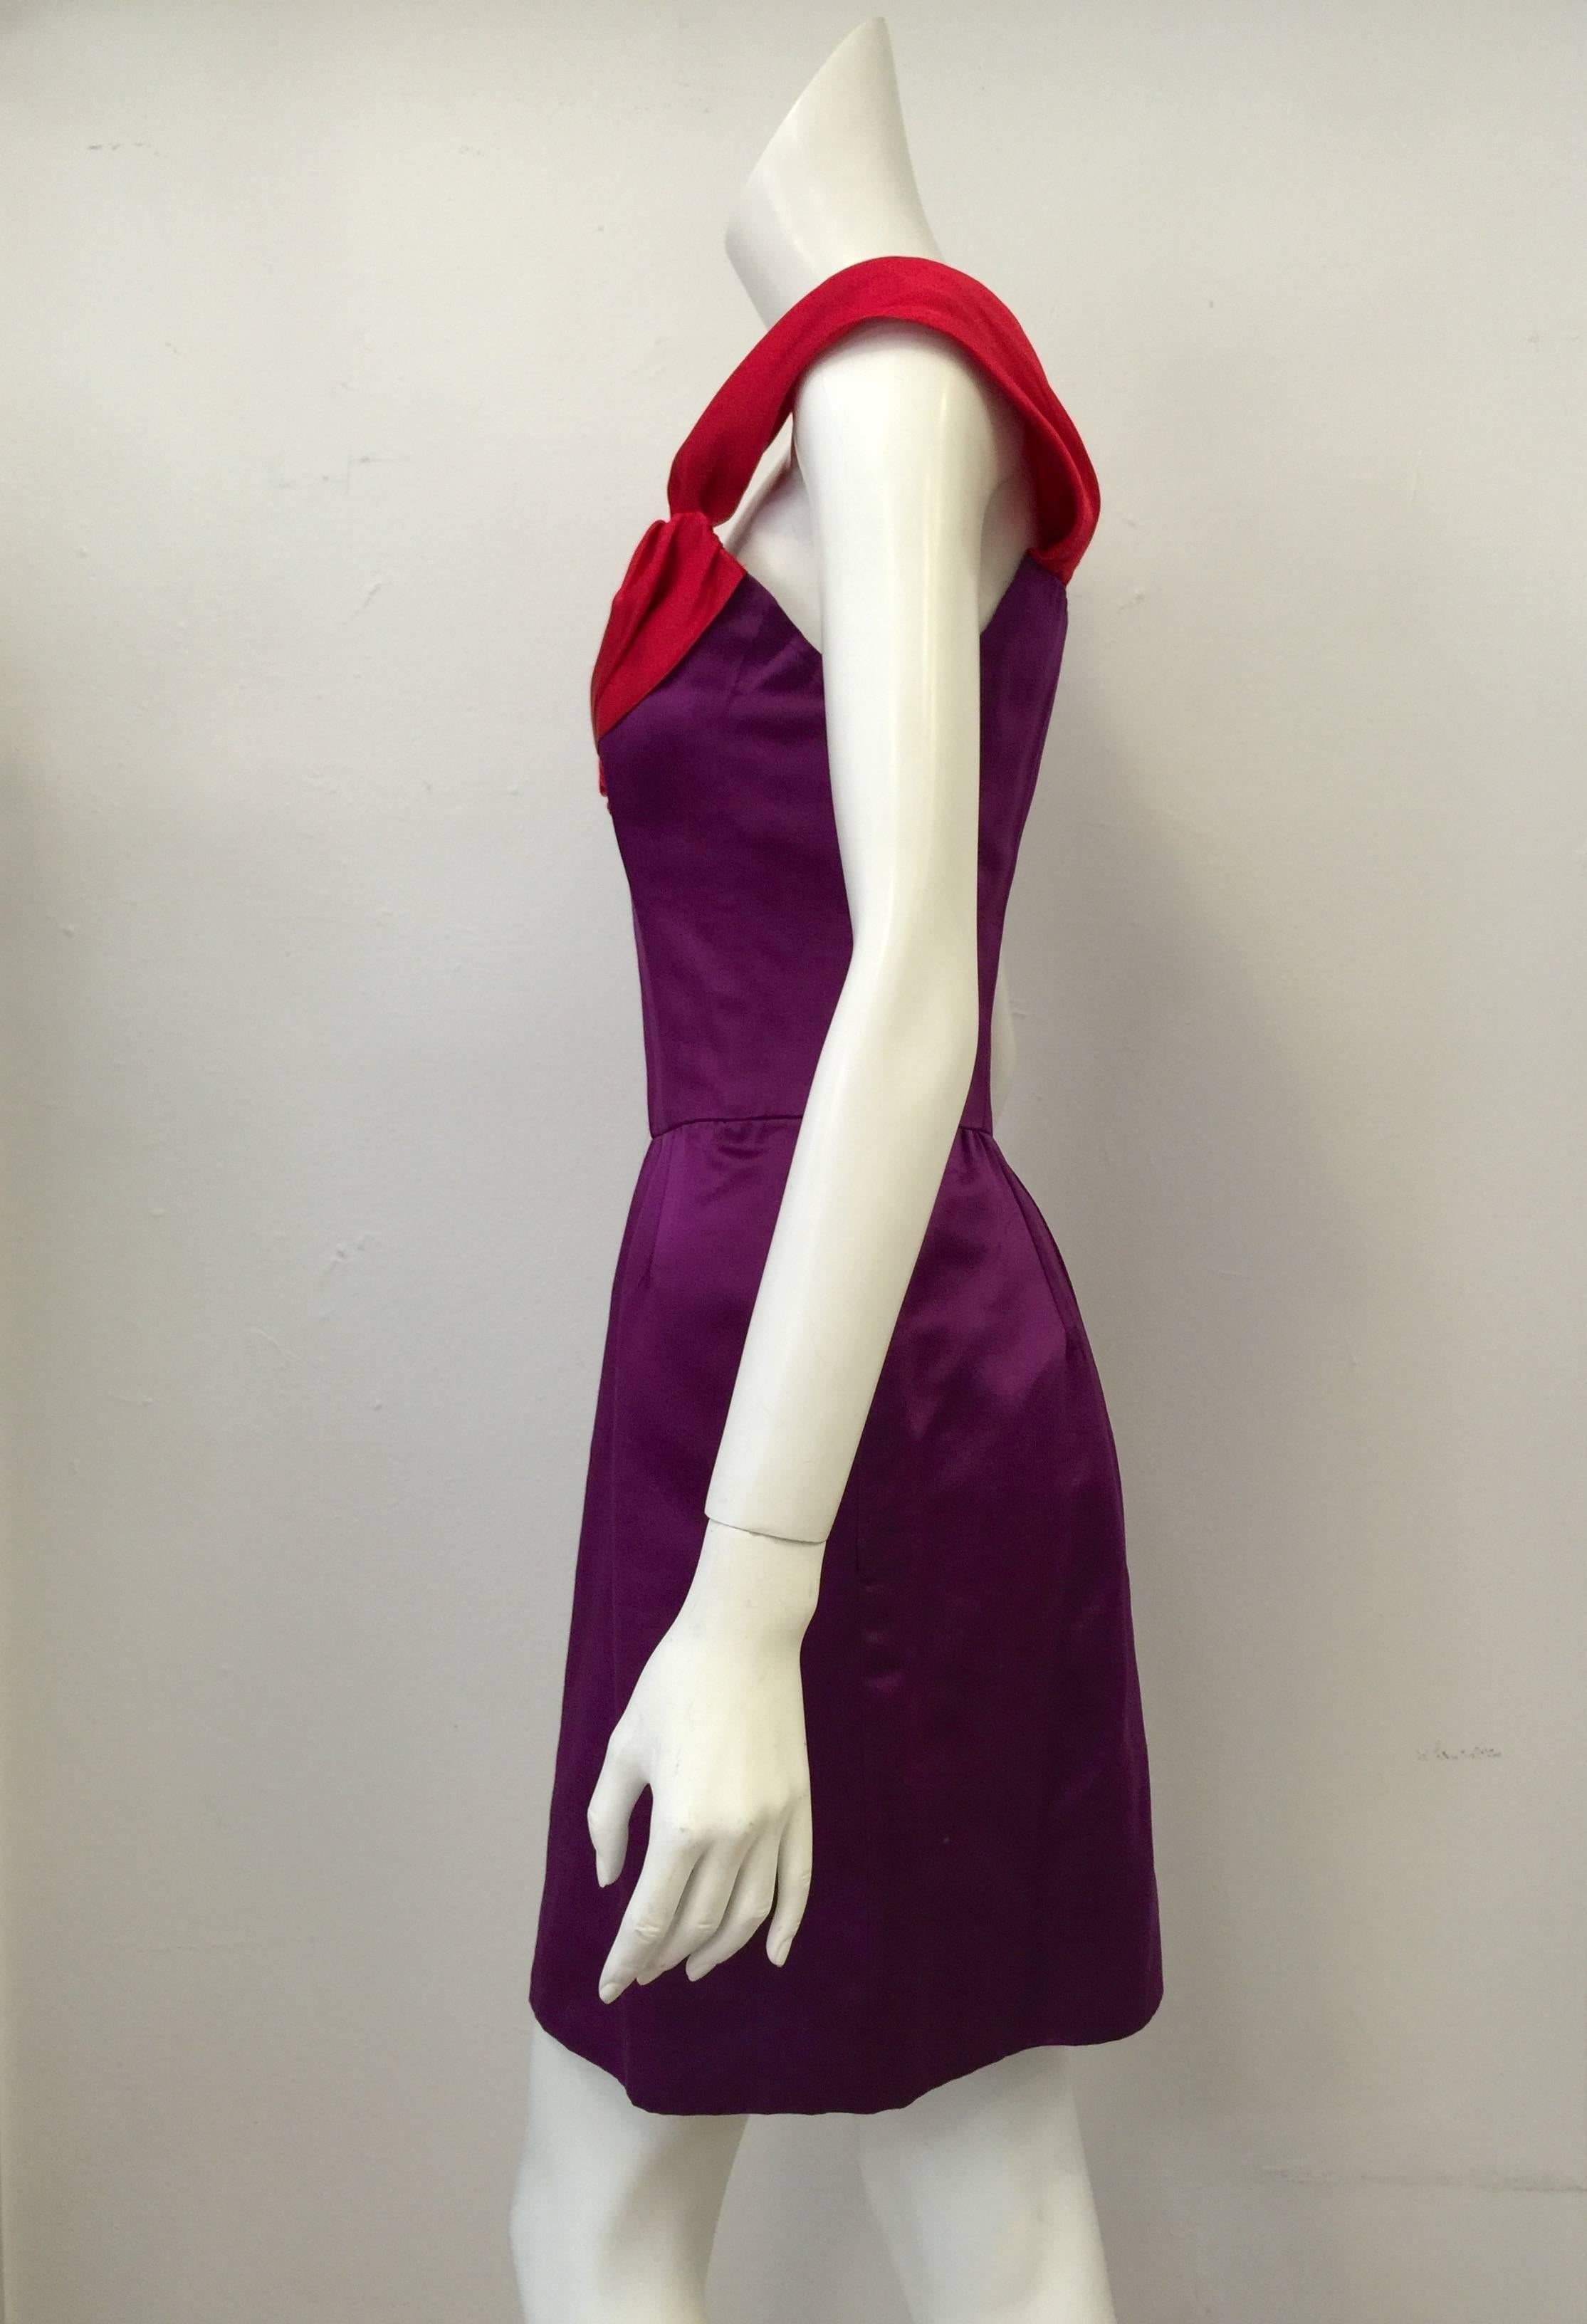 Only a renowned haute couture house could craft this unforgettable confection!  This dress illustrates why Madame Lanvin is celebrated as one of the 20th Century's most influential designers.  Features ultra luxurious weighty silk satin in electric